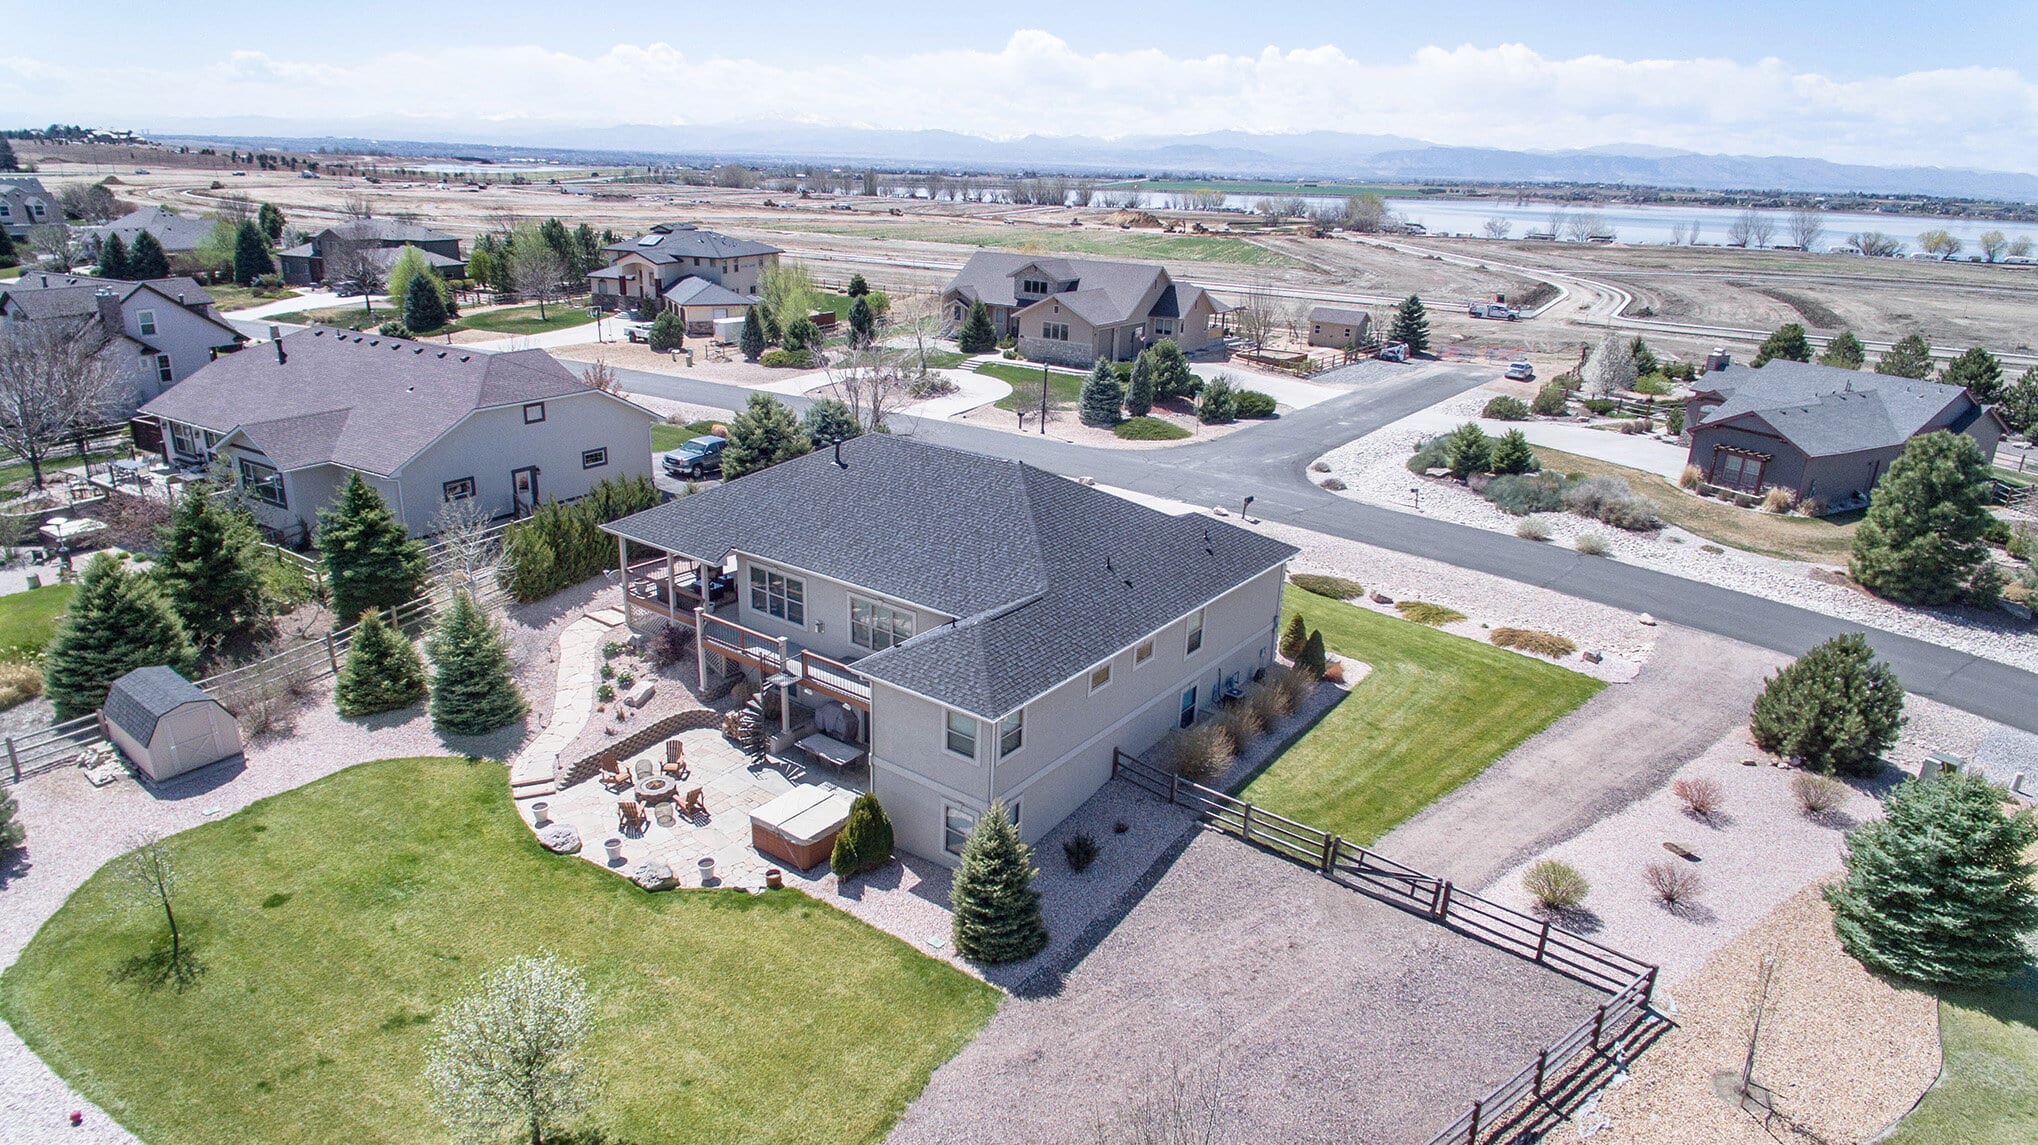 Aerial view of a large home in a neighborhood by a lake with mountains